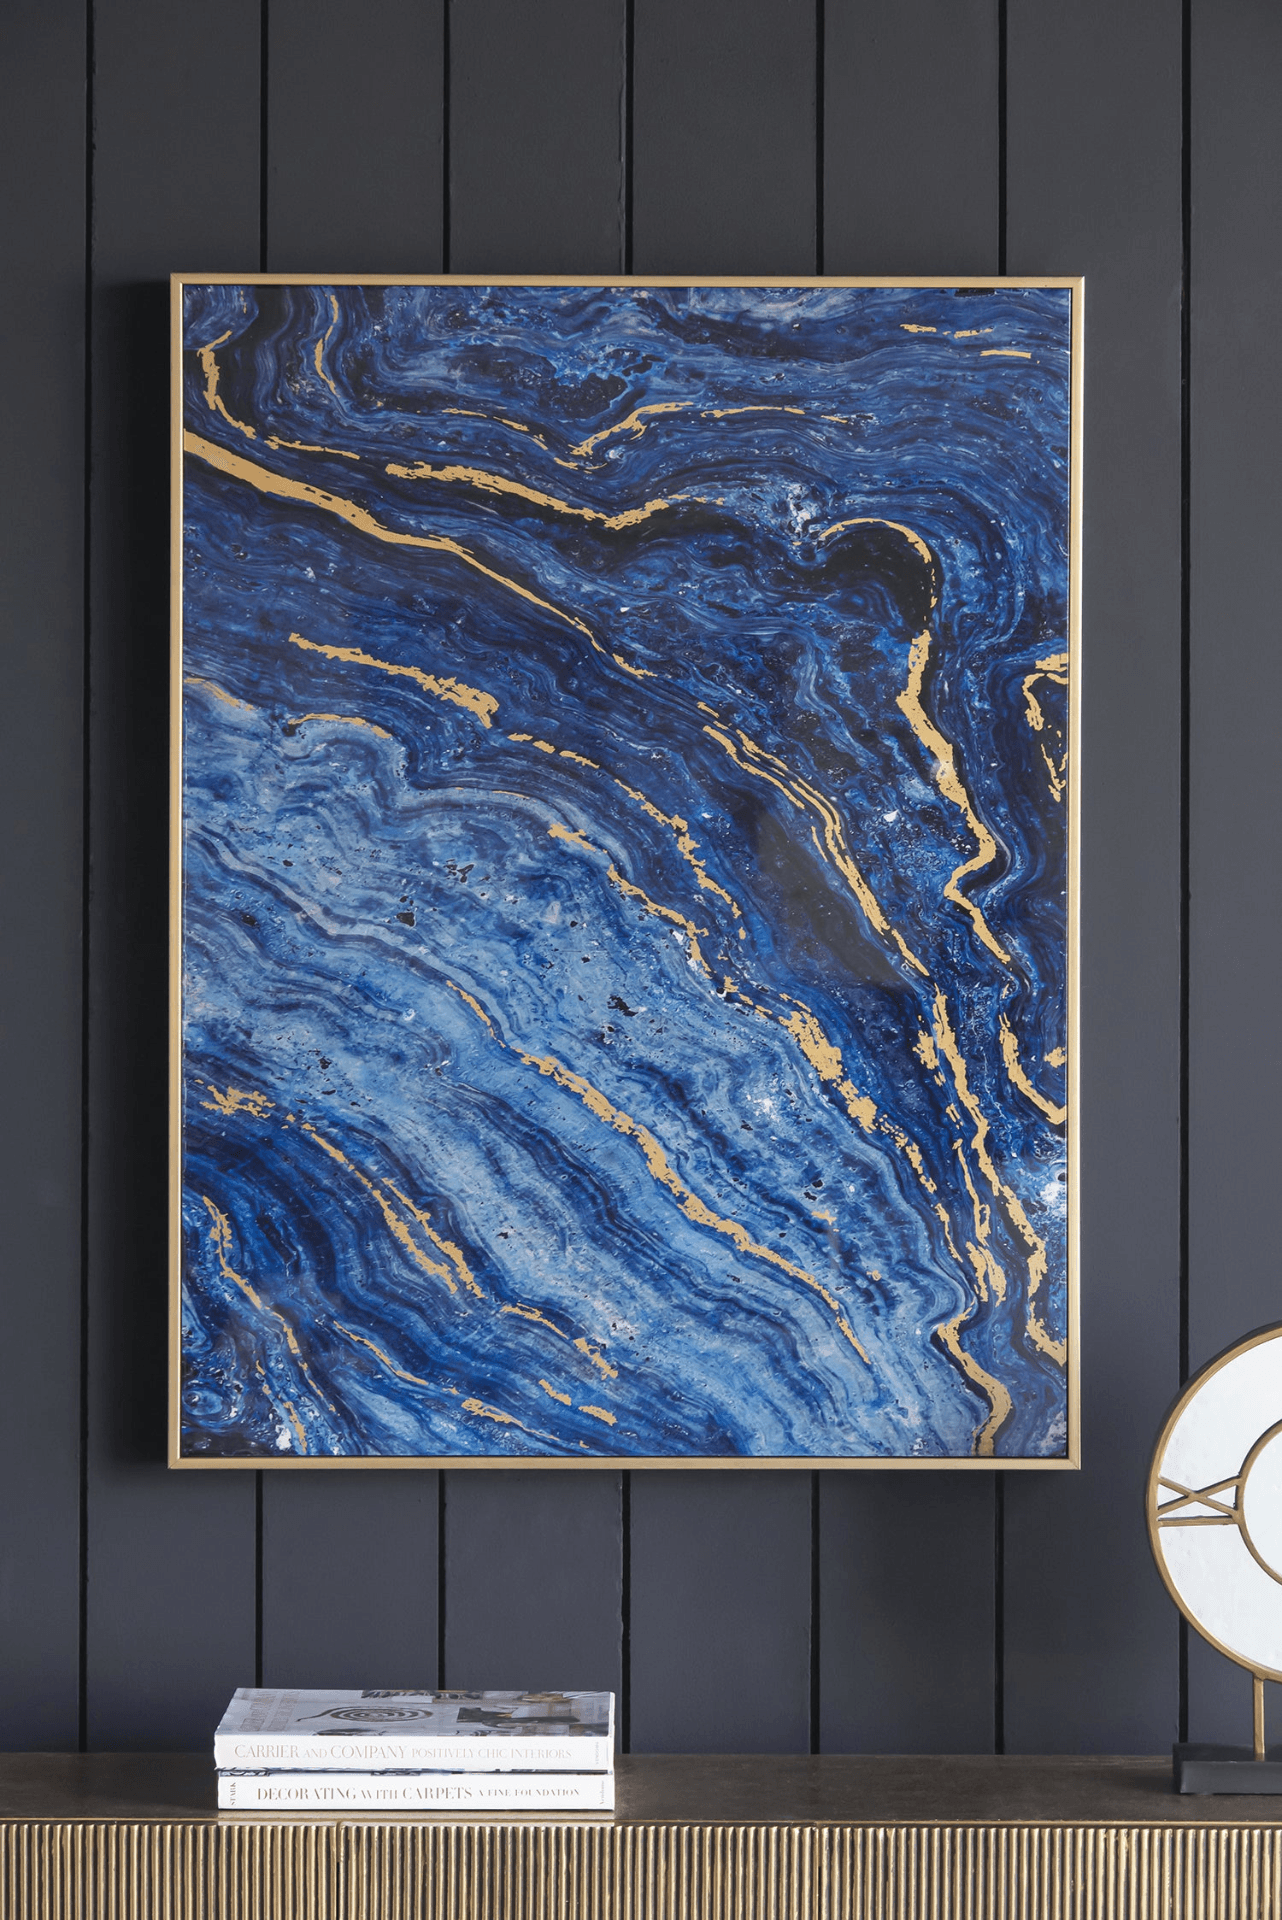 Set of 2 Blue and Gold Framed Art Panels, Unique Marbled Design, 30.5" x 40" - Loomini